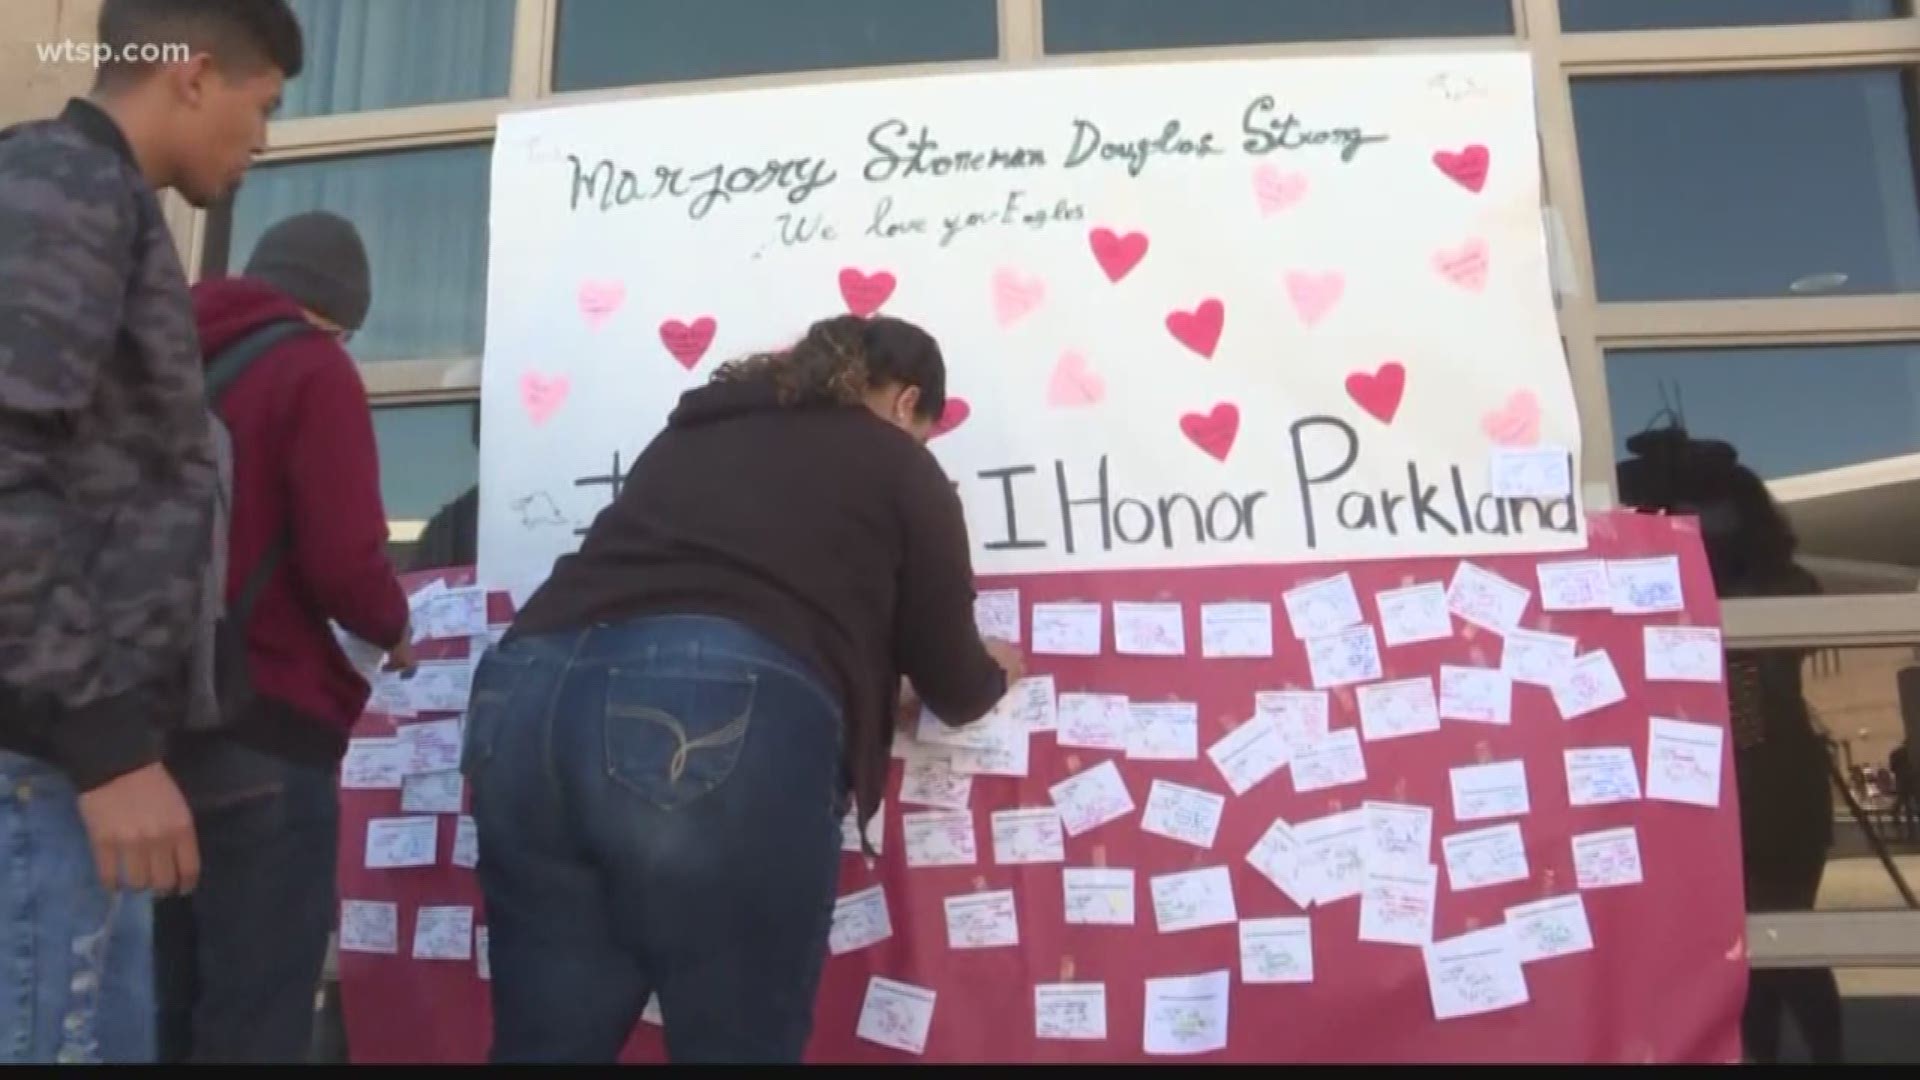 Students and staff wrote messages on eagle postcards marked with #HowIHonorParkland.